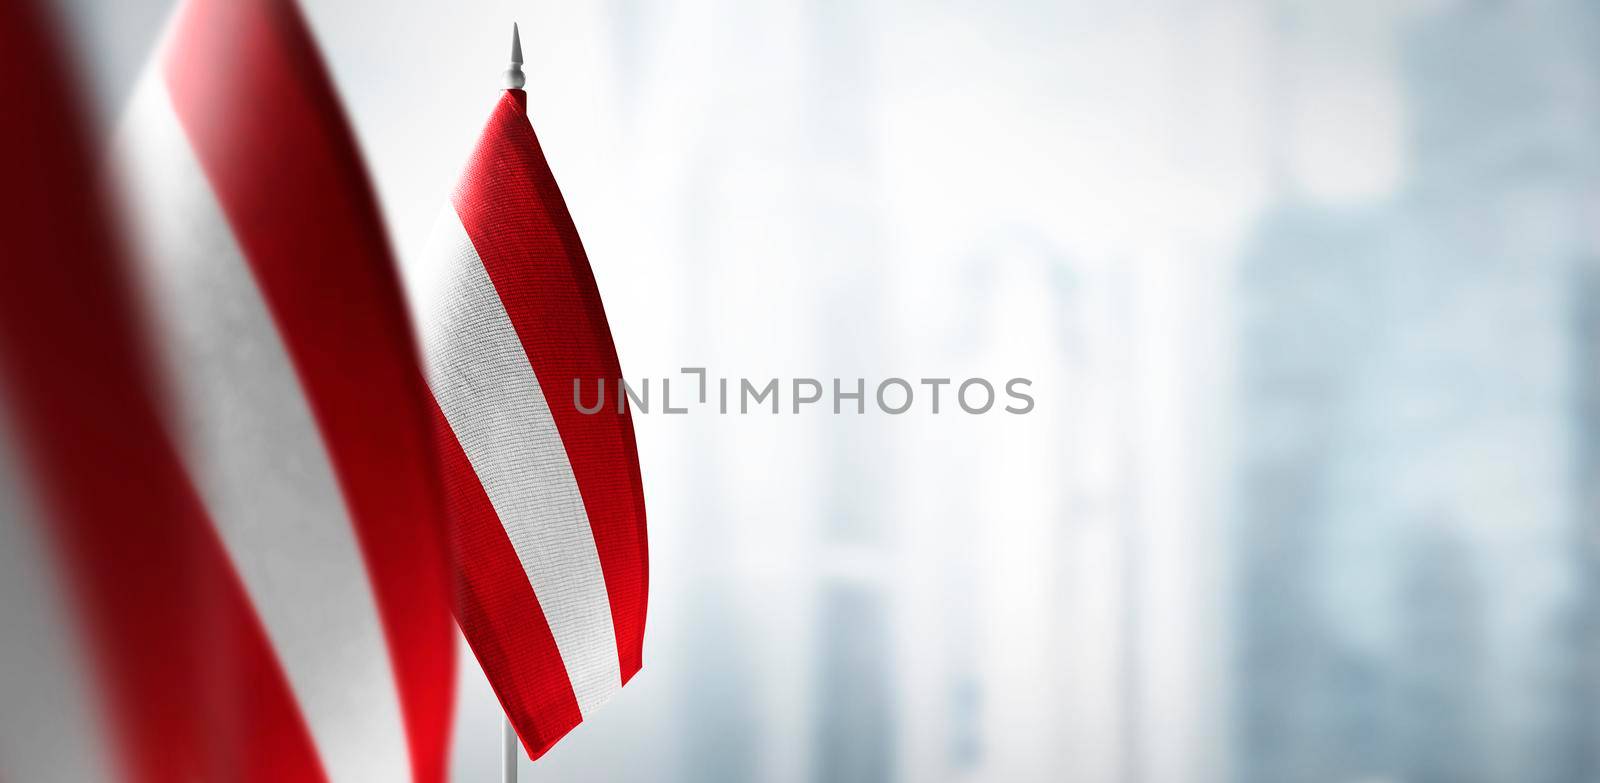 Small flags of Austria on the background of an urban abstract blurred background.